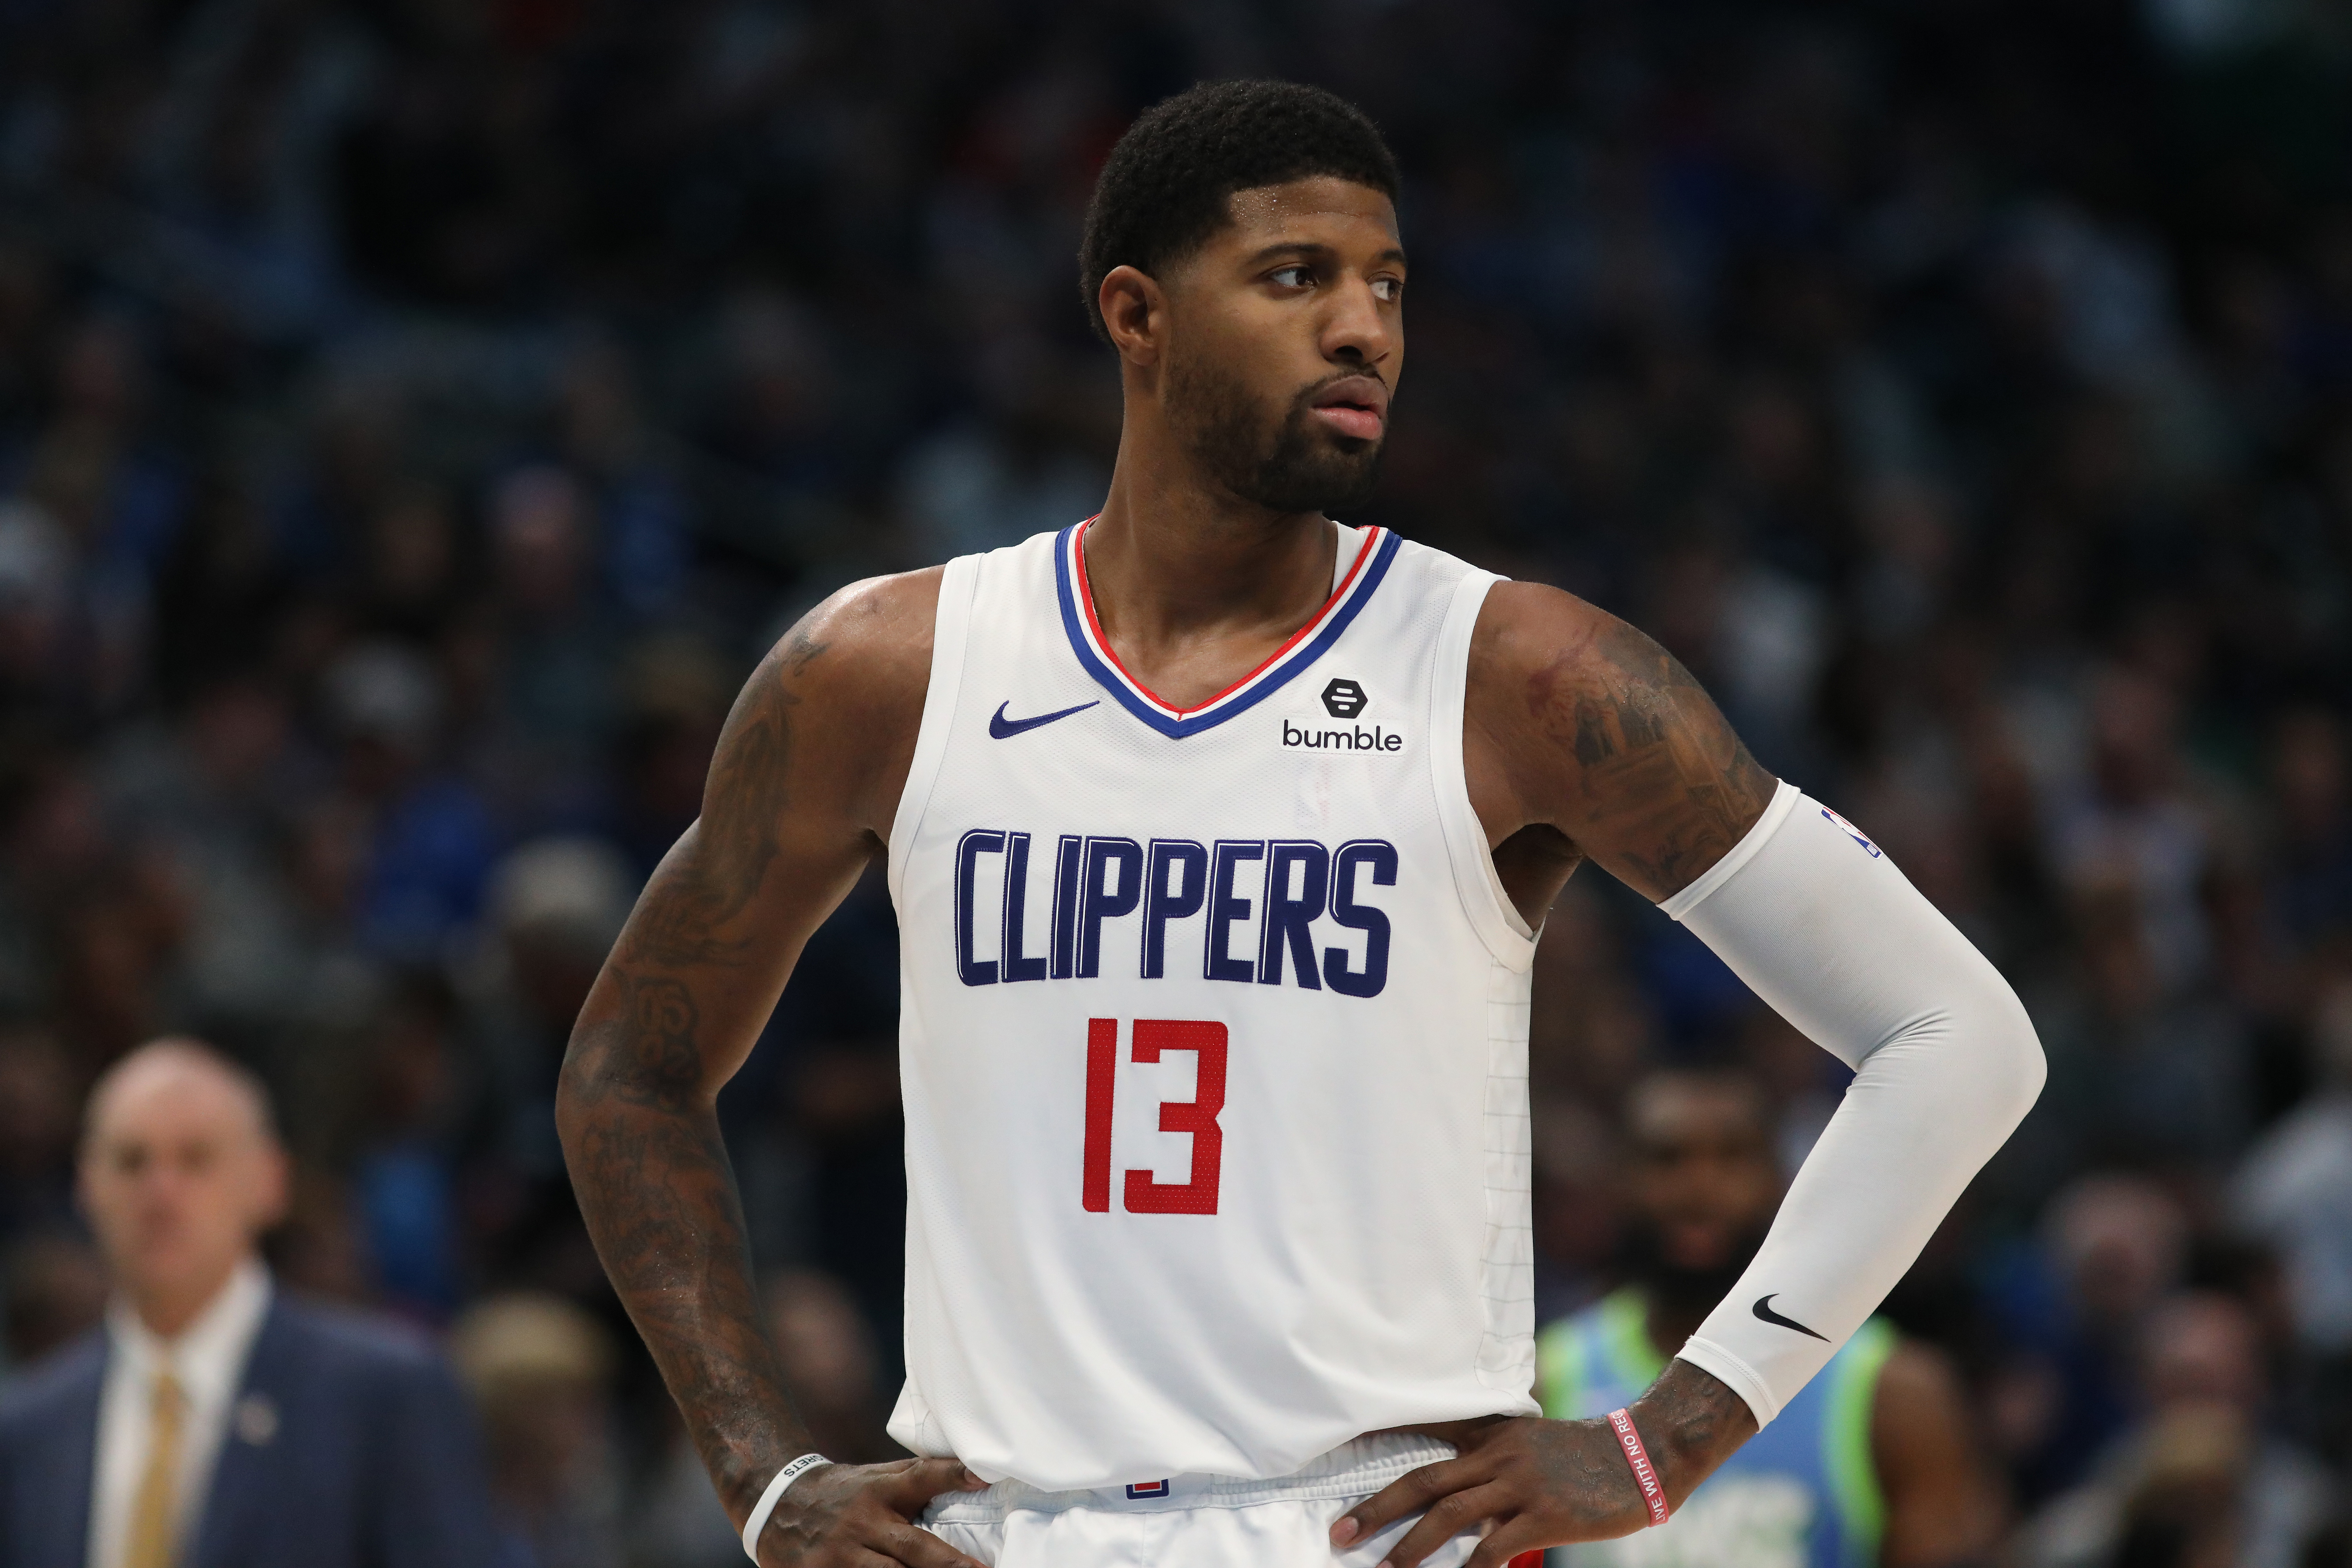 The Internet Mocks Paul George And Gives Him Pandemic P Nickname After Poor Playoff Performance In Game 2 Vs Mavs Brobible